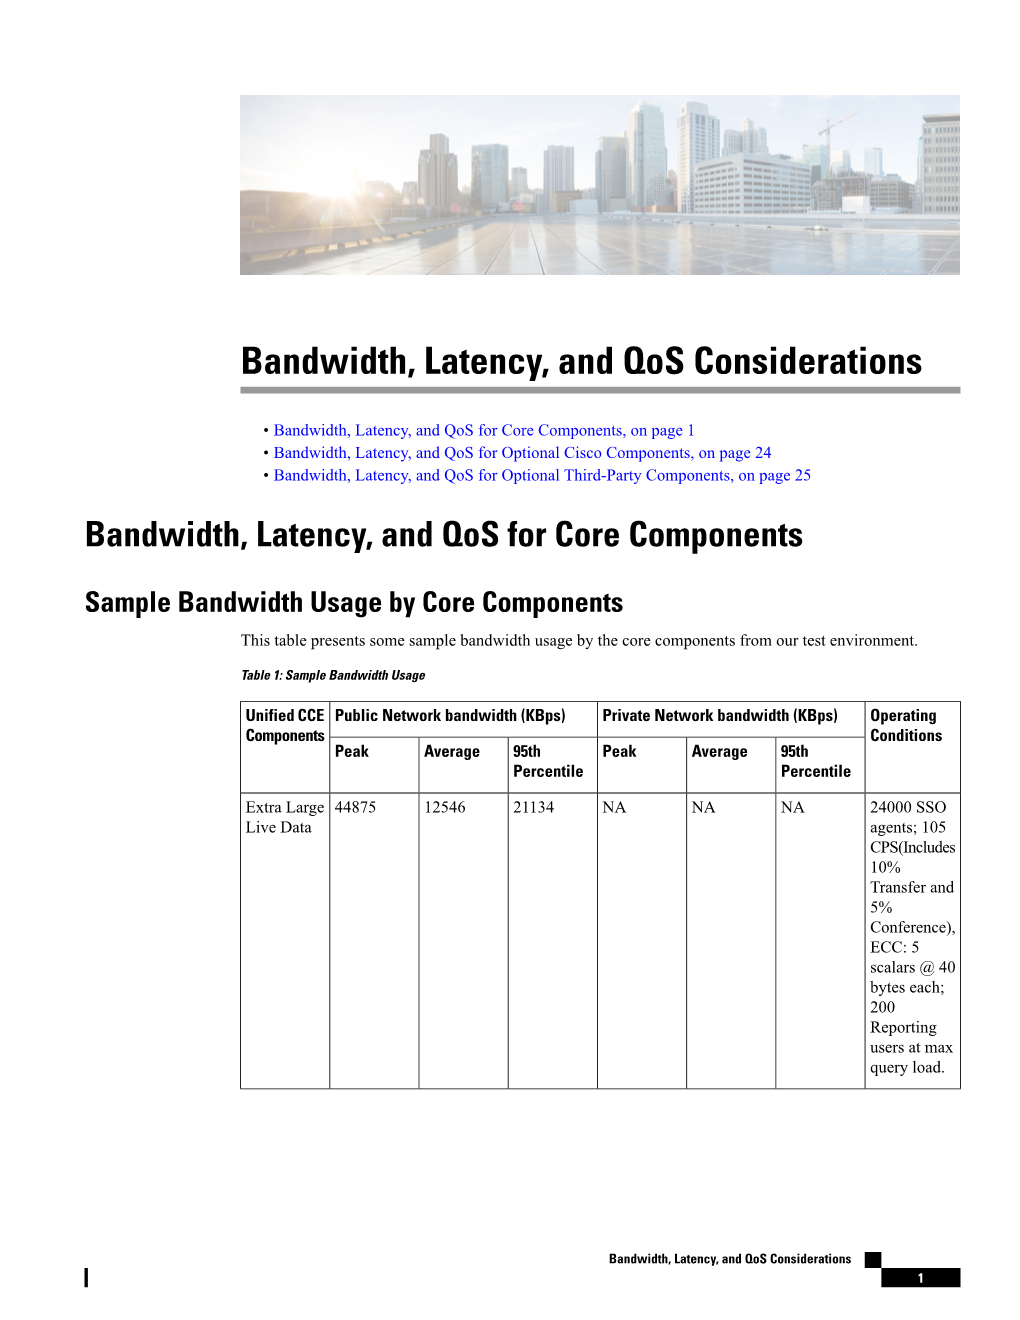 Bandwidth, Latency, and Qos Considerations